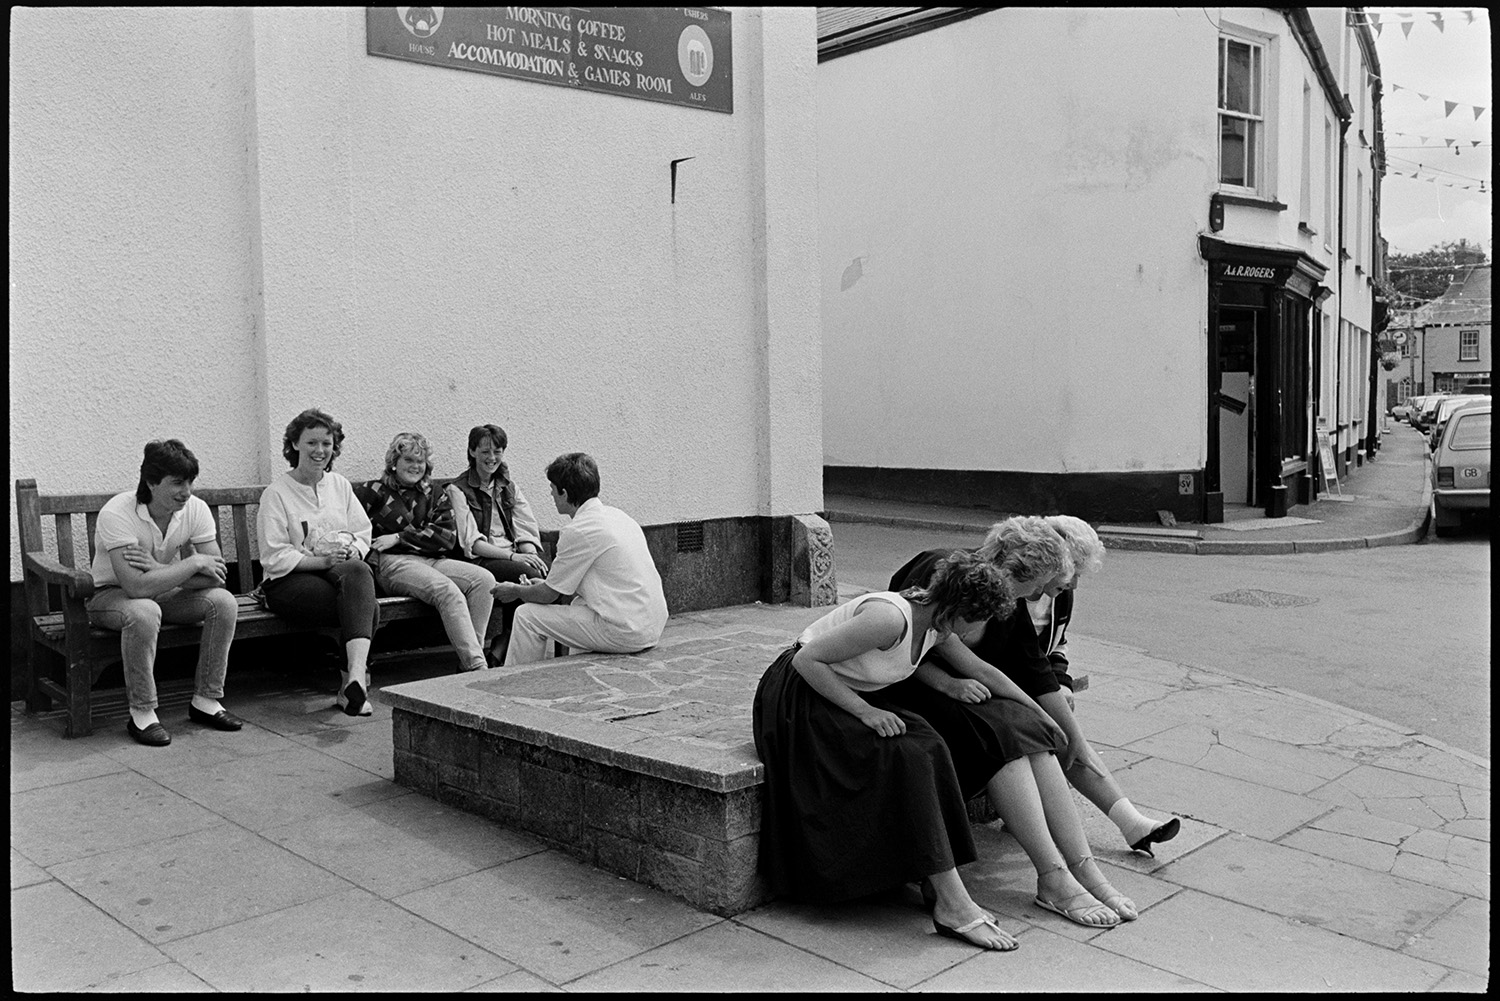 People sitting in middle of town chatting. 
[Young men and women sitting on a bench and concrete plinth outside the Red Lion pub in Chulmleigh. A&R Rogers Chemist can be seen across the street, which is decorated with bunting.]